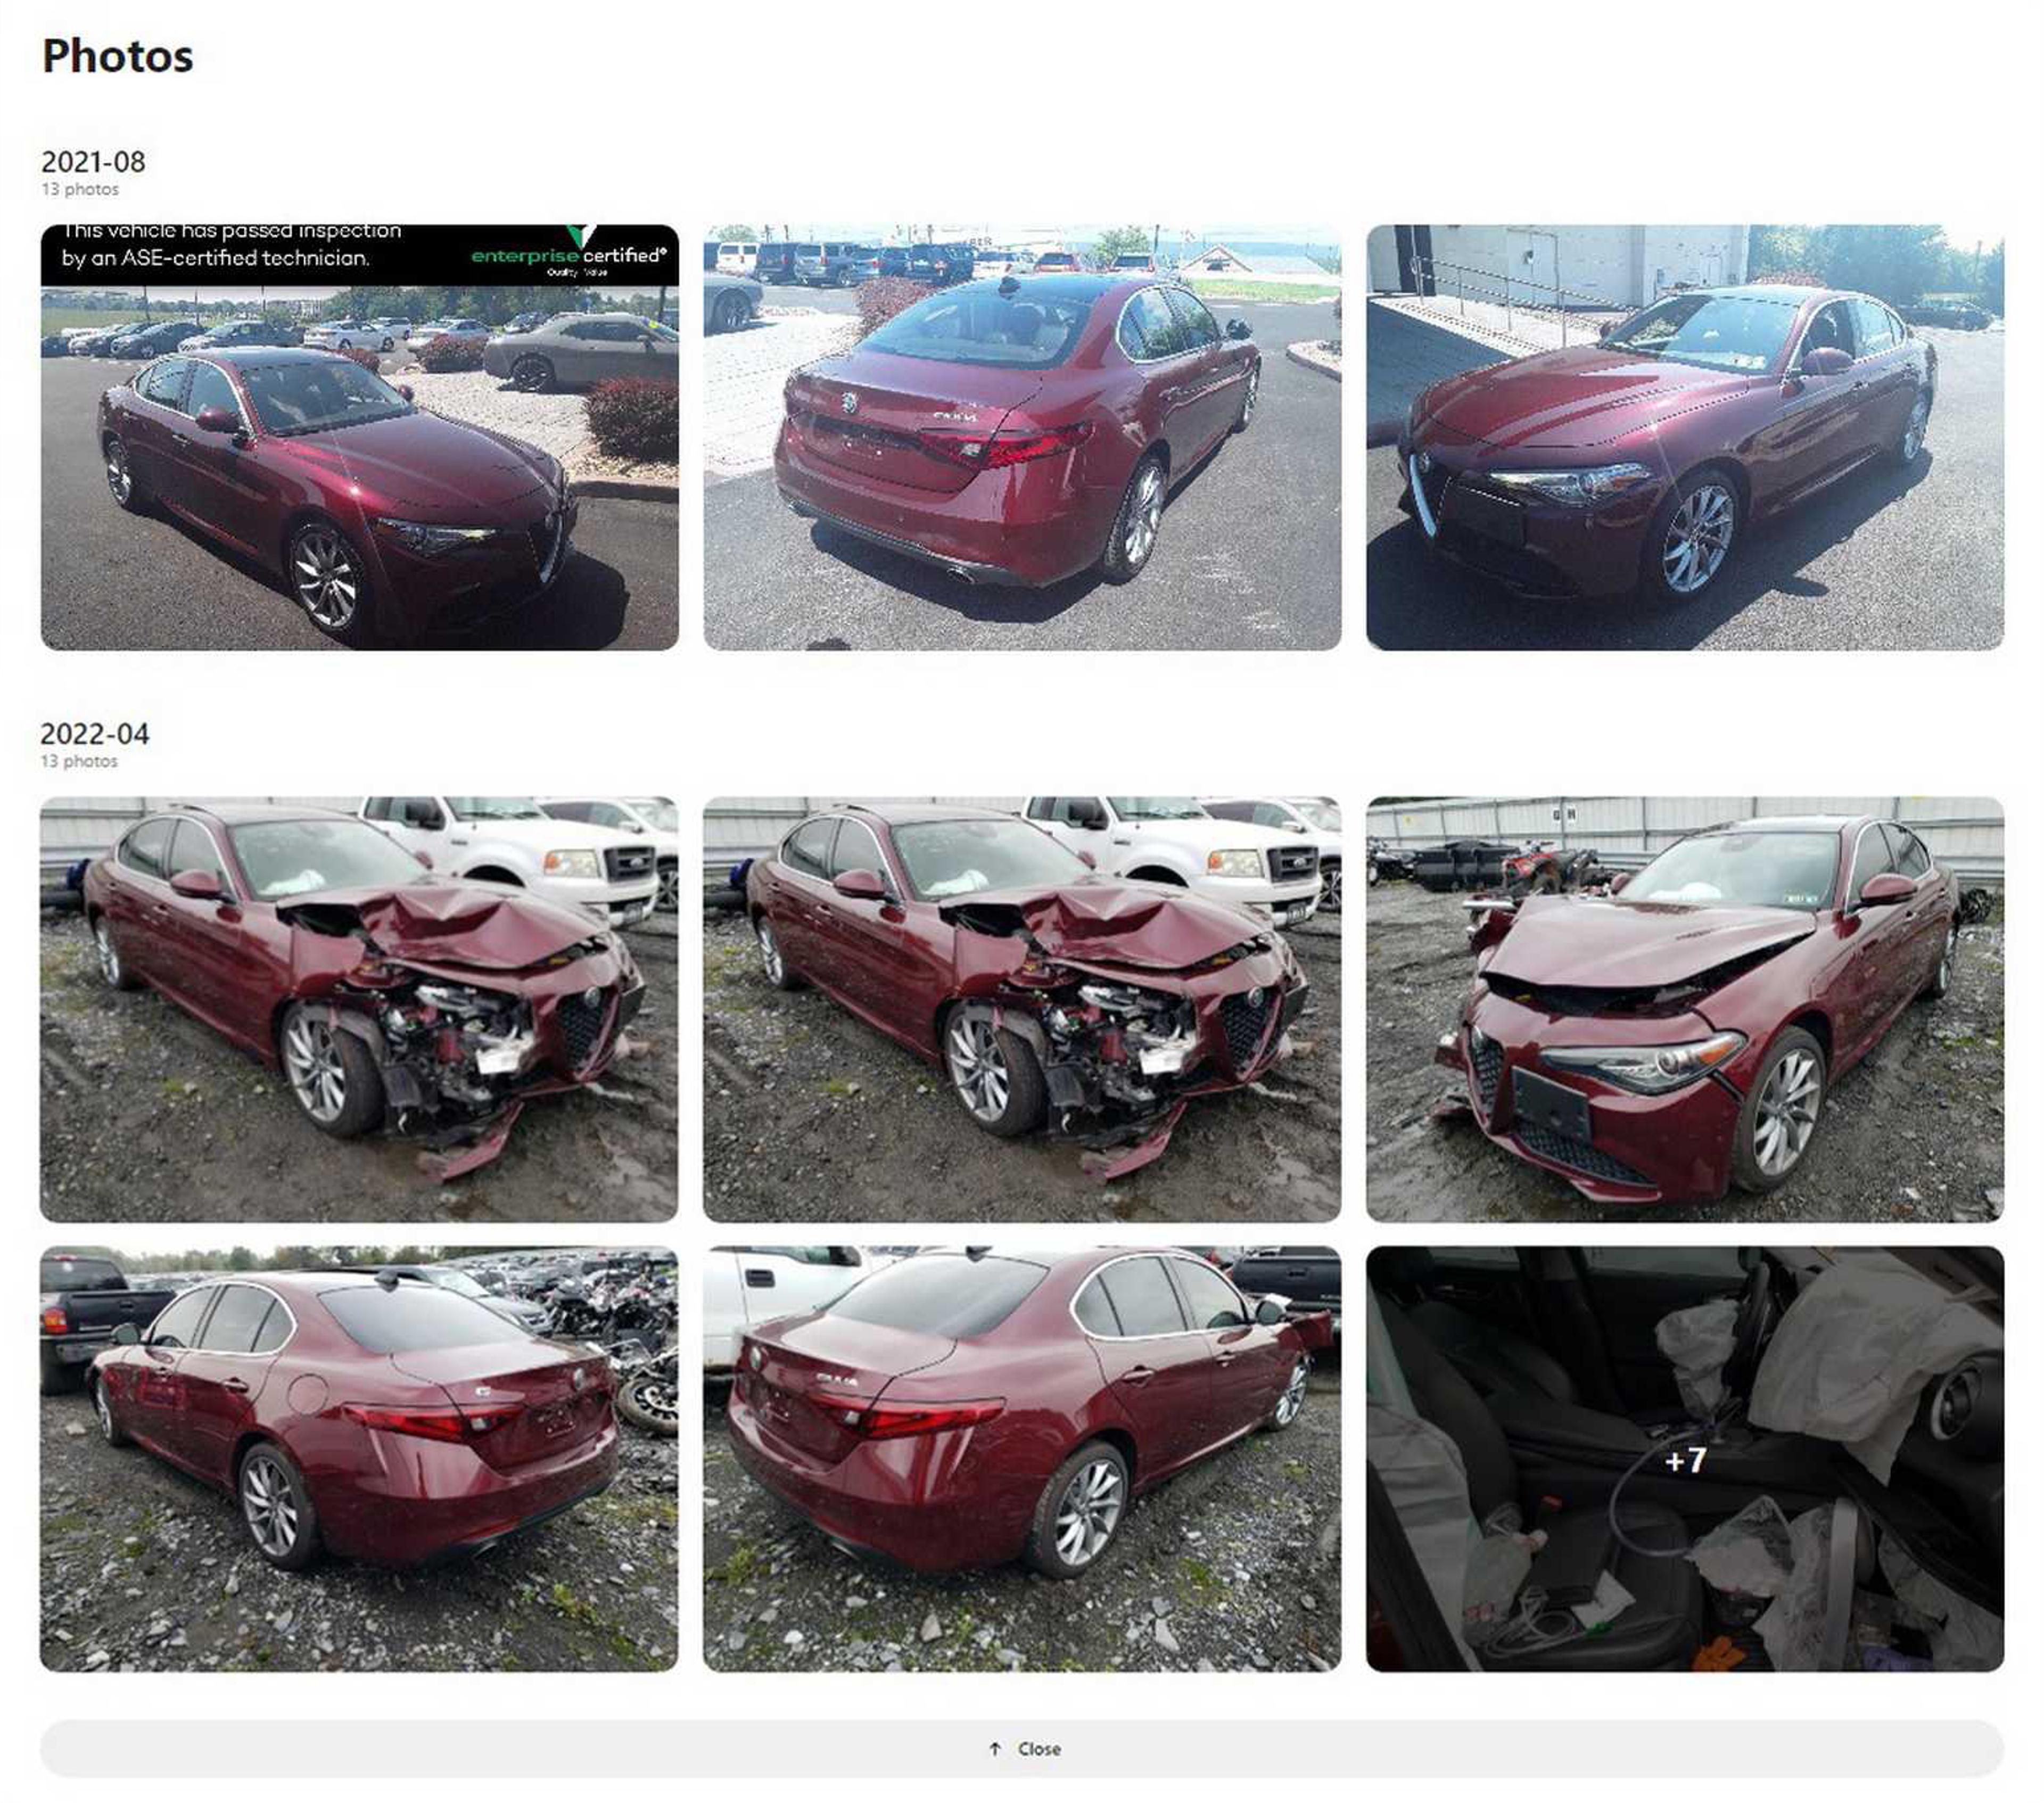 Damaged car photos in carVertical report